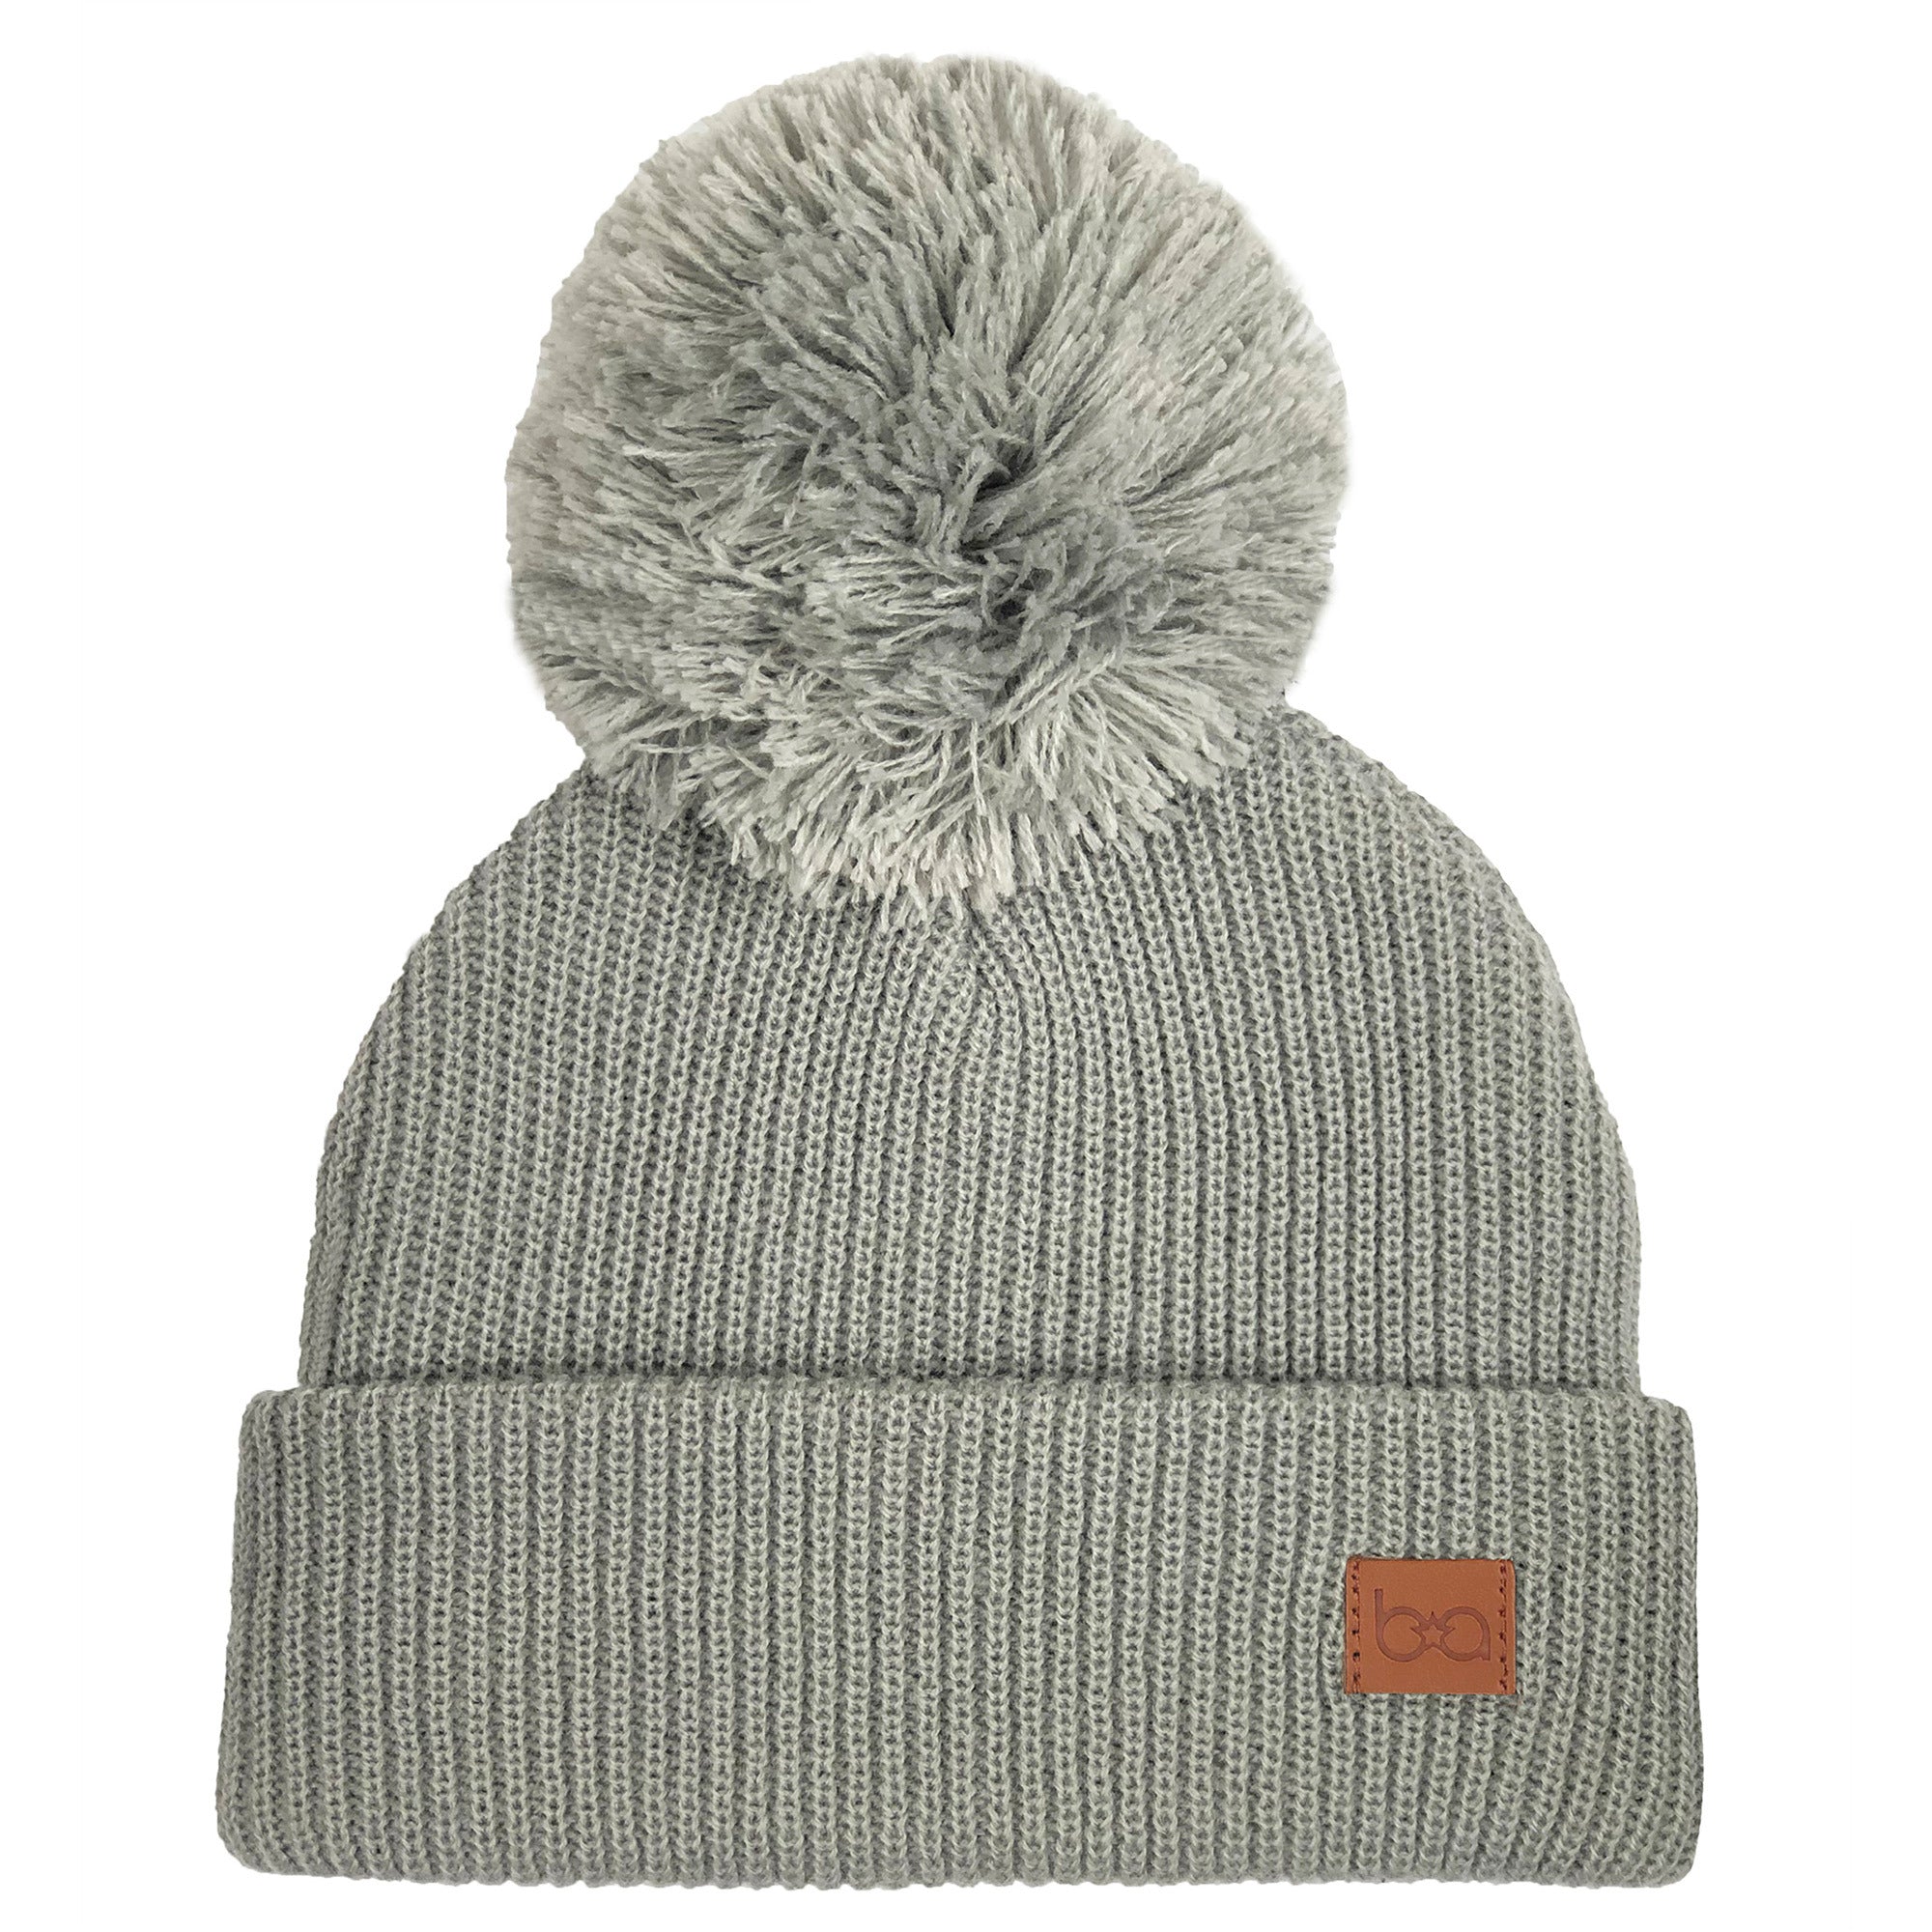 Accessories > Hats – Kidcentral Supply